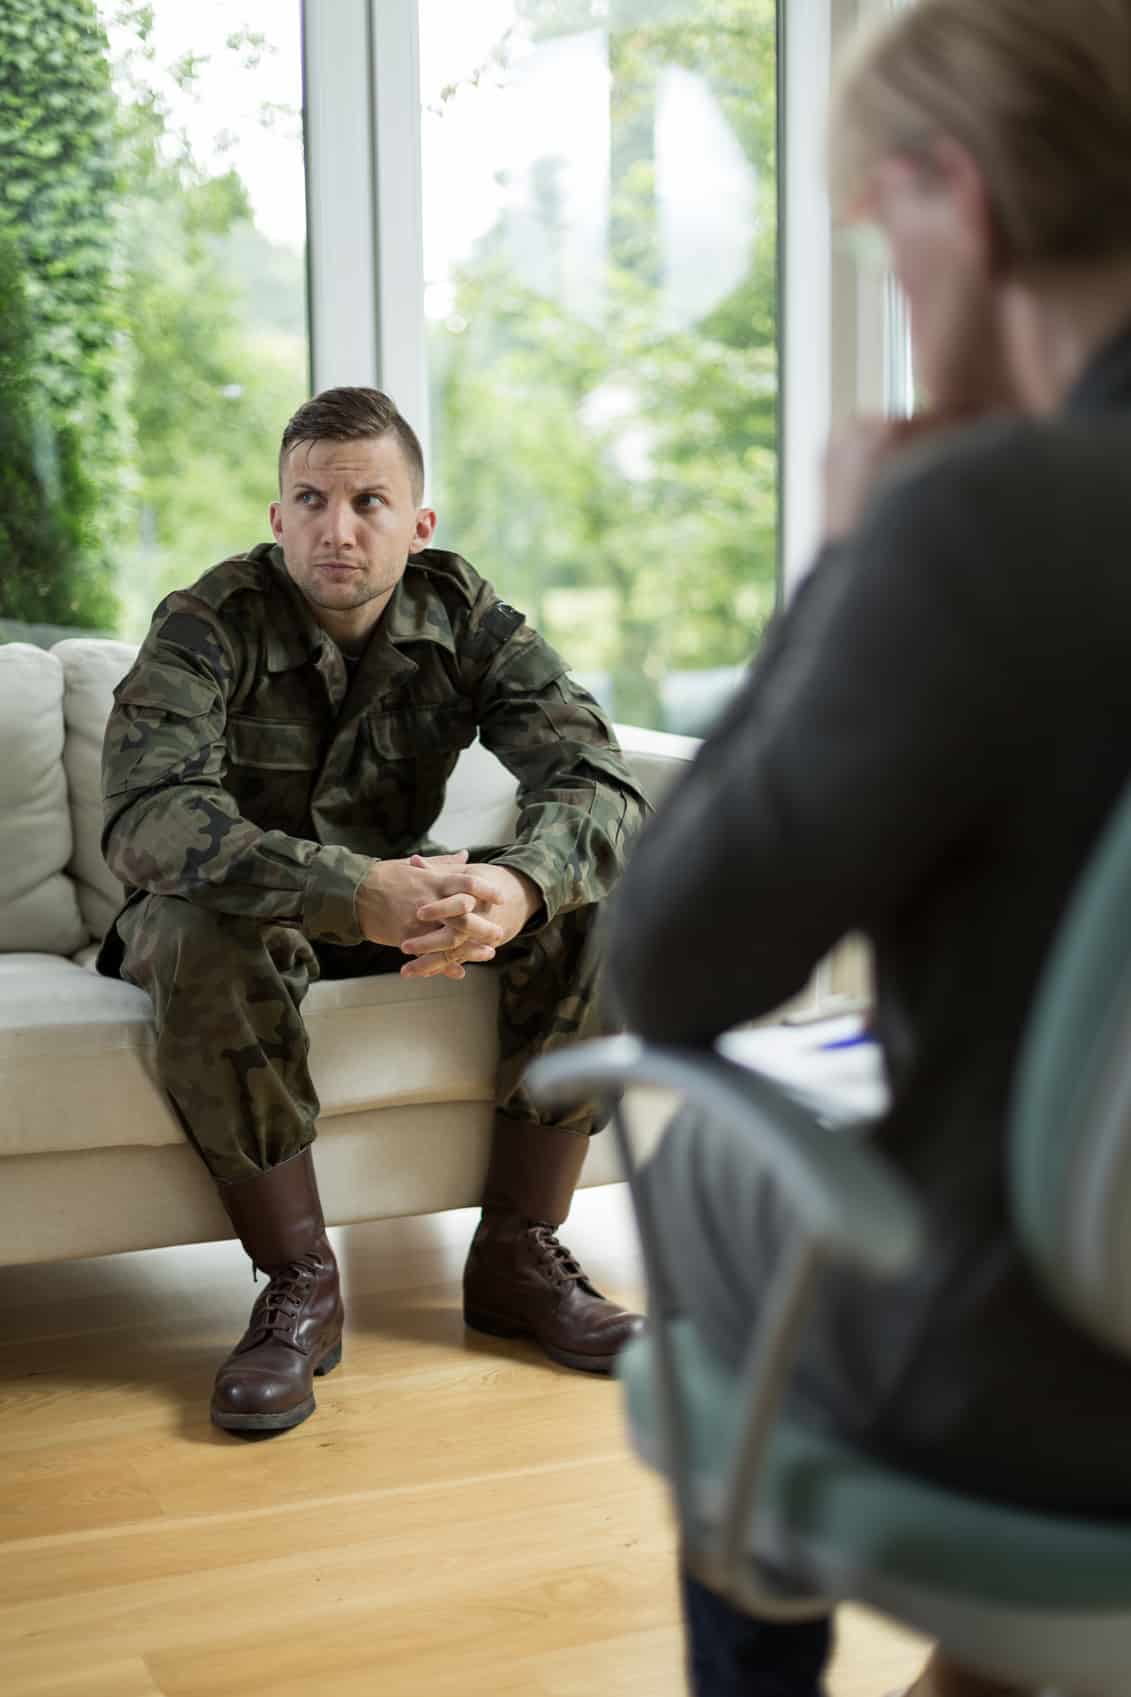 Image of soldier with posttraumatic stress disorder during therapy